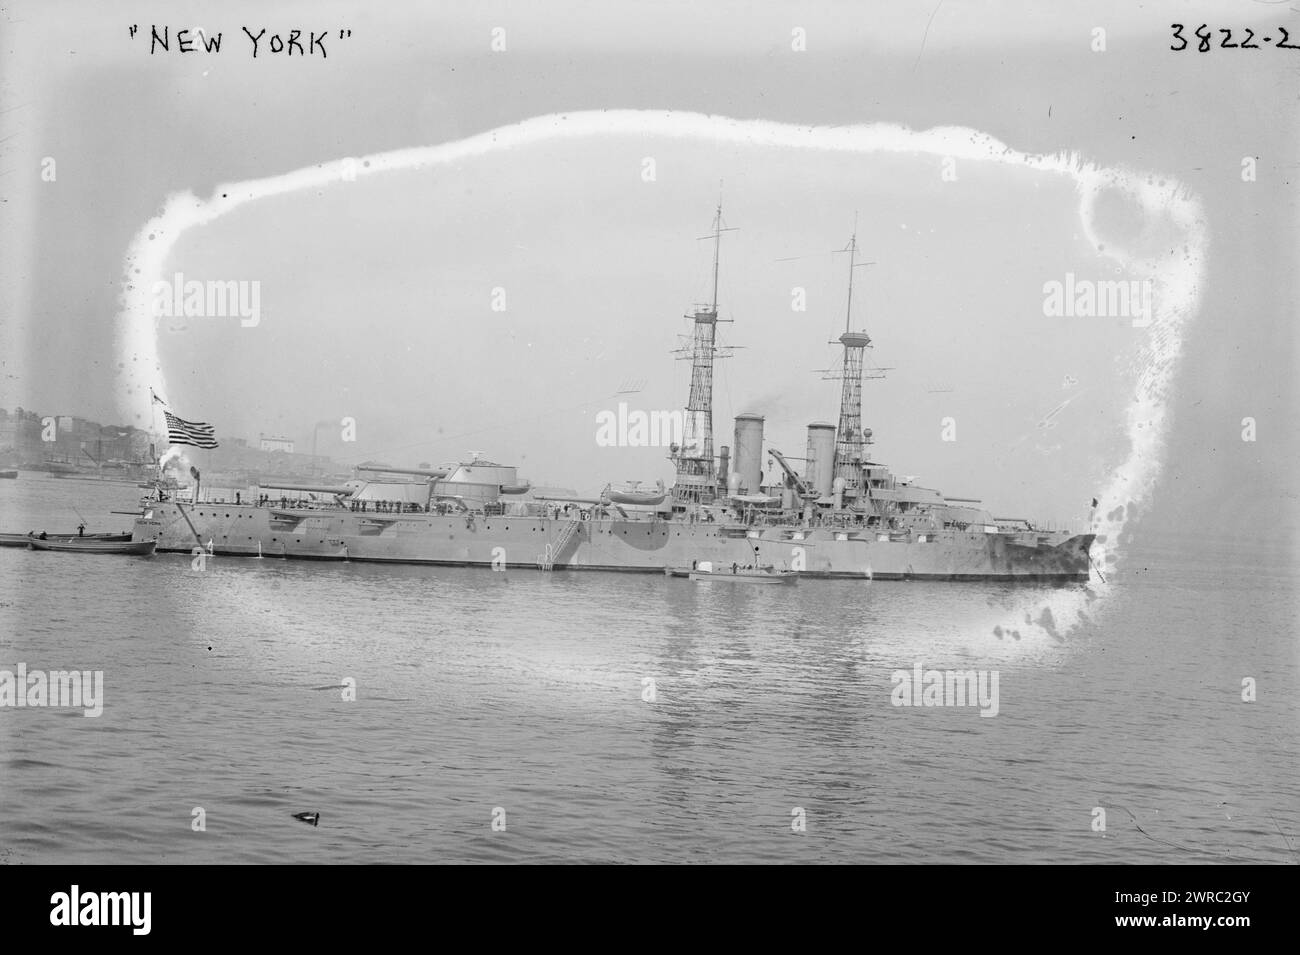 NEW YORK, Photograph shows the USS New York, a United States Navy battleship., between ca. 1915 and ca. 1920, Glass negatives, 1 negative: glass Stock Photo